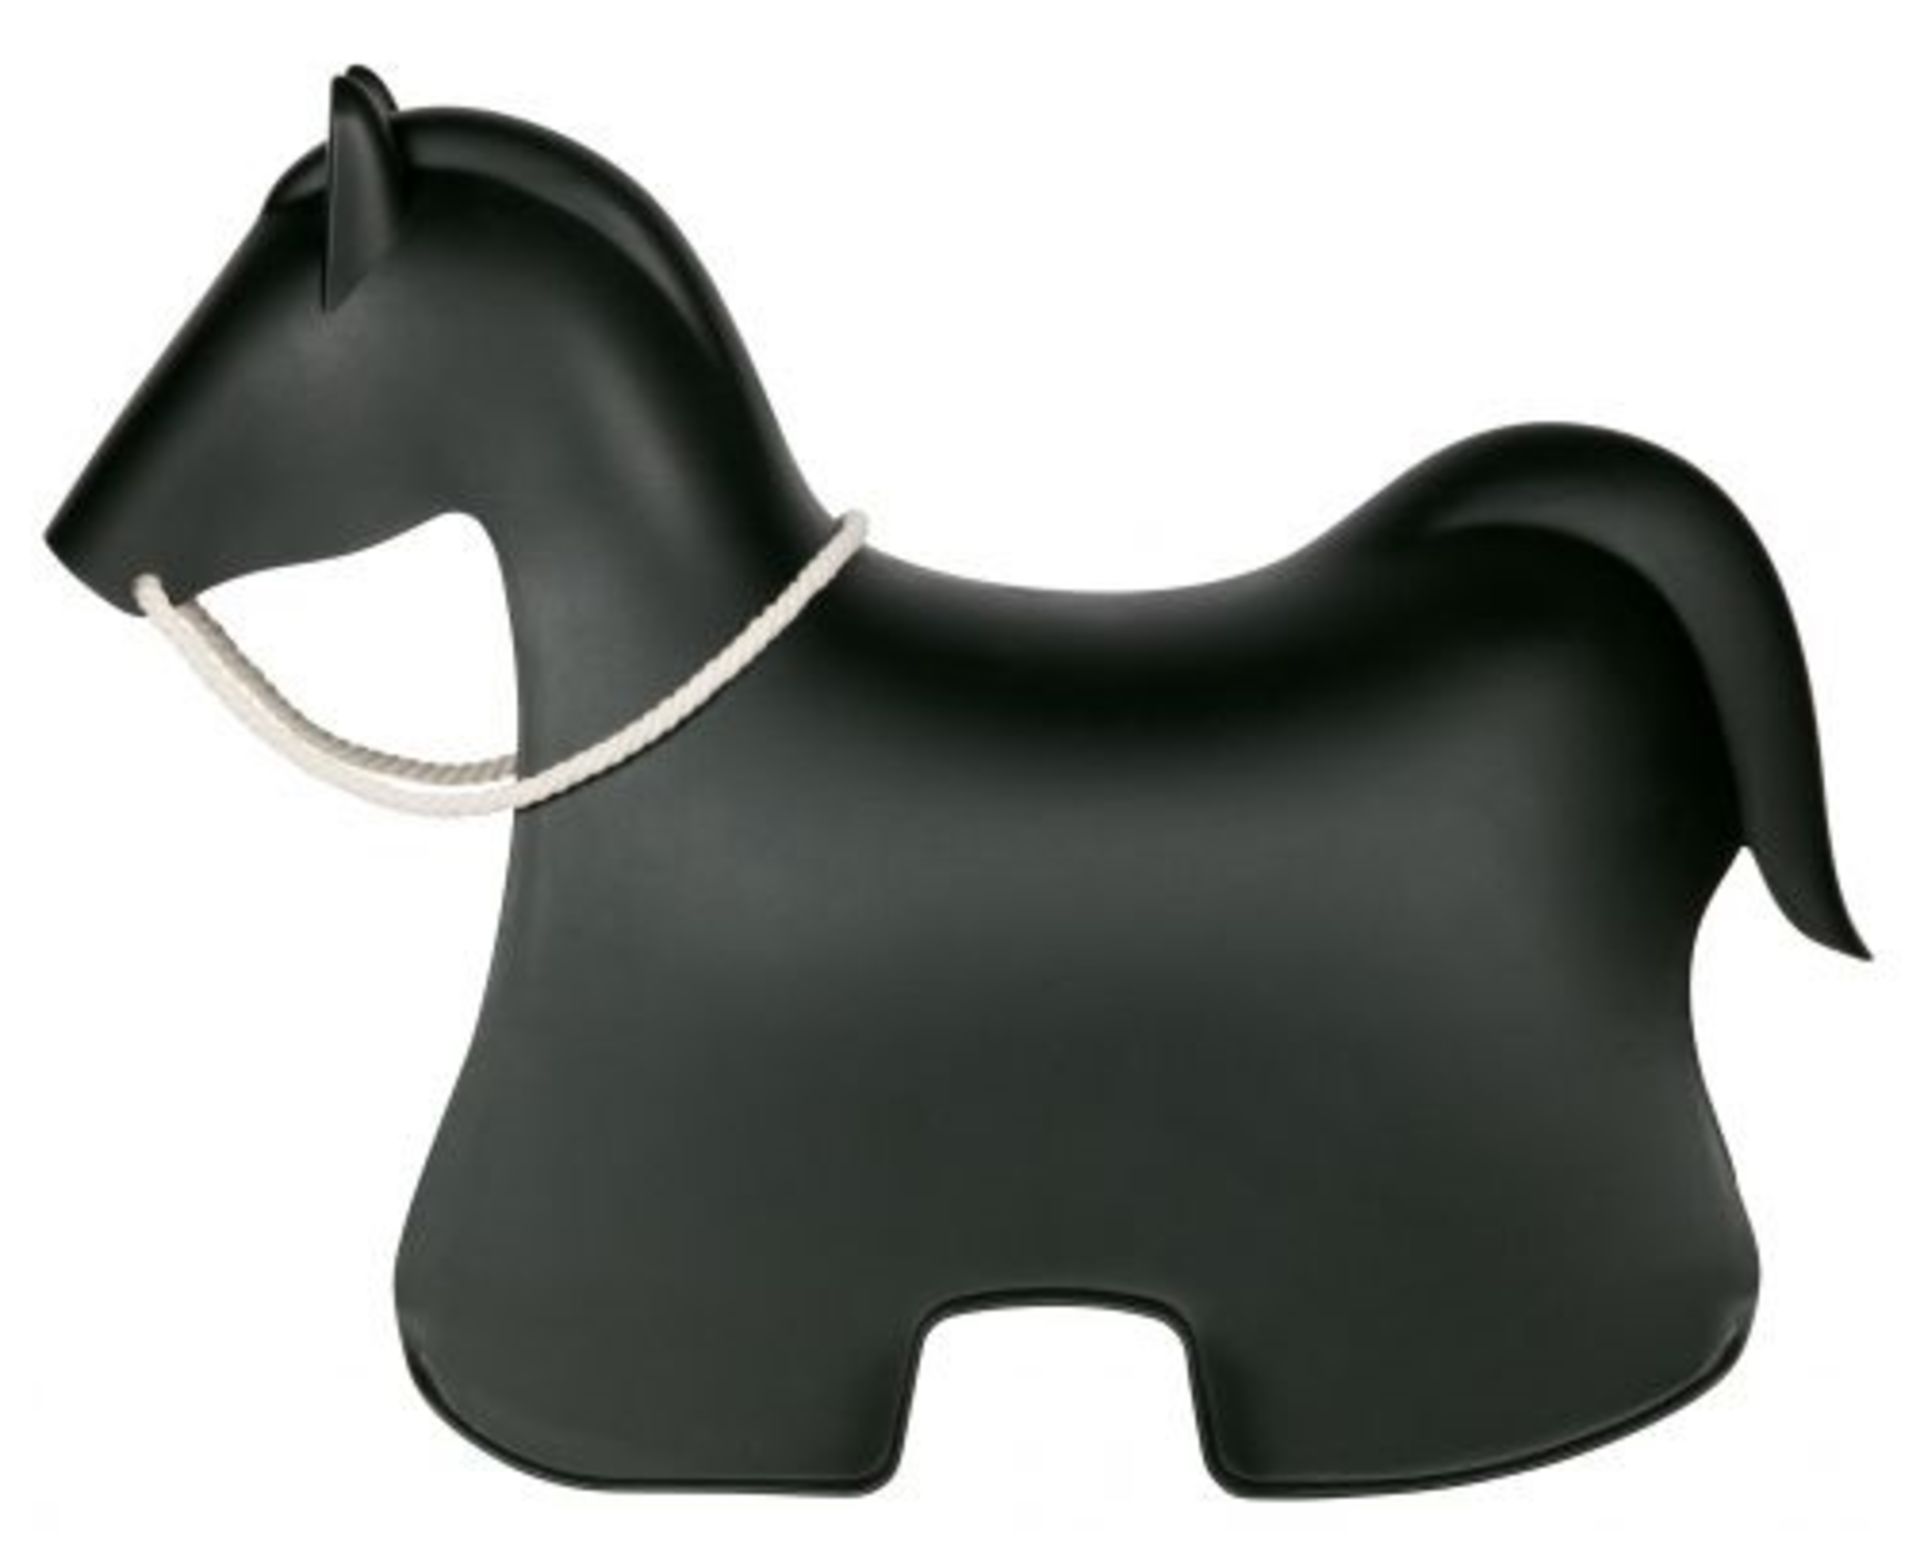 1 x MEIA Contemporary Rocking Horse In Black - Dimensions: H61xW80xD41cm - Brand New Stock - Image 2 of 5